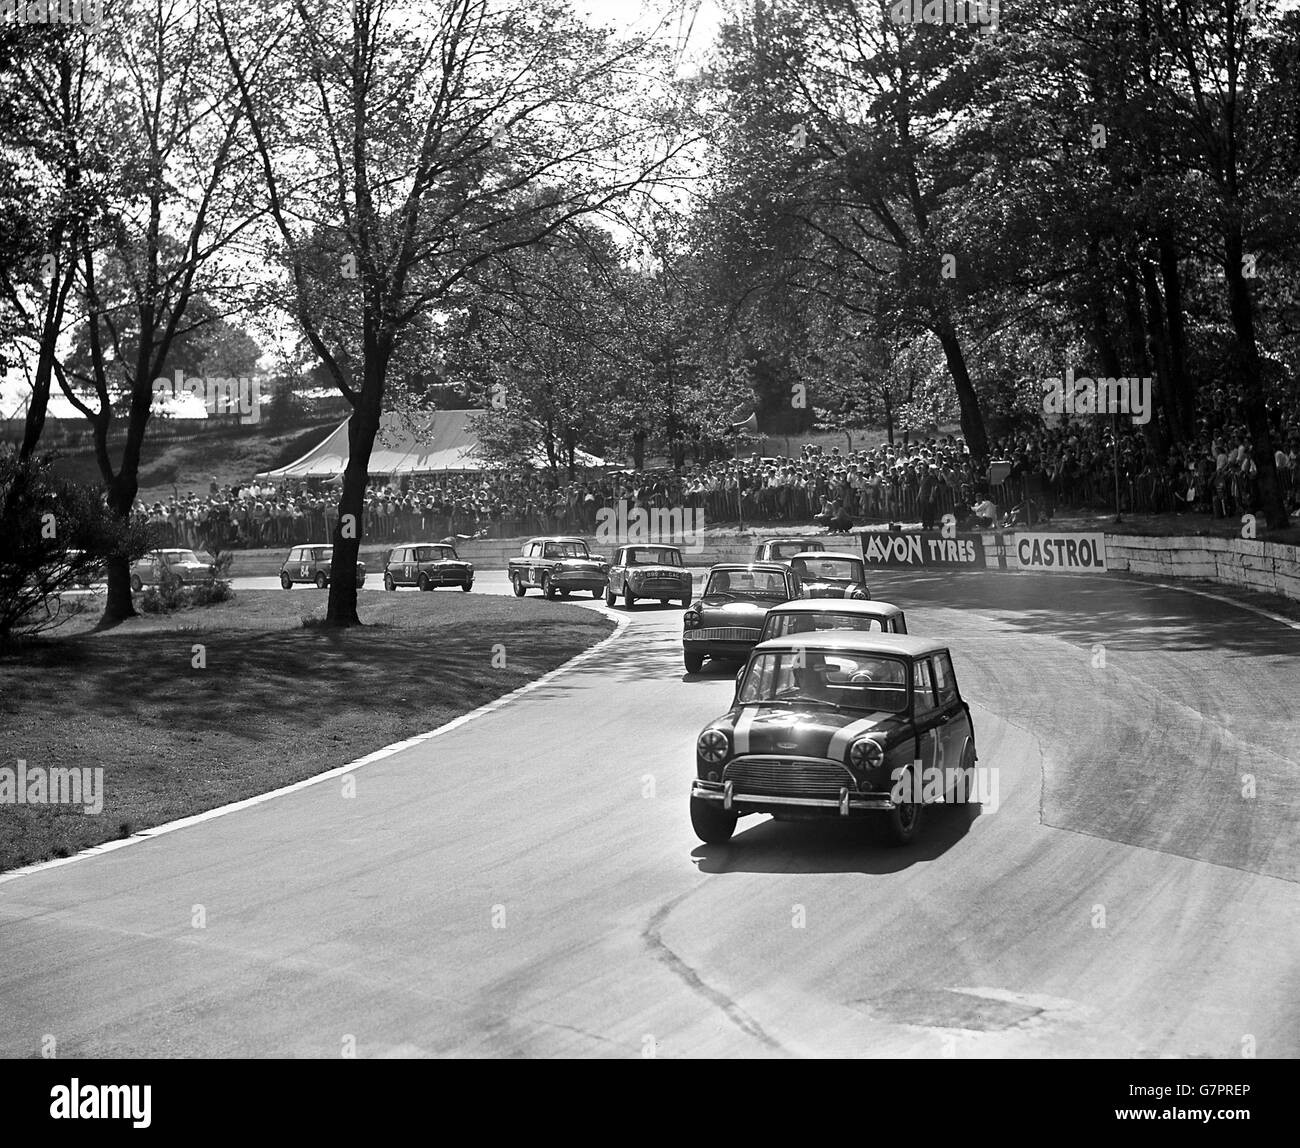 A mini cooper leads the field at the North Tower Crescent bend during the small car trophy race. Stock Photo